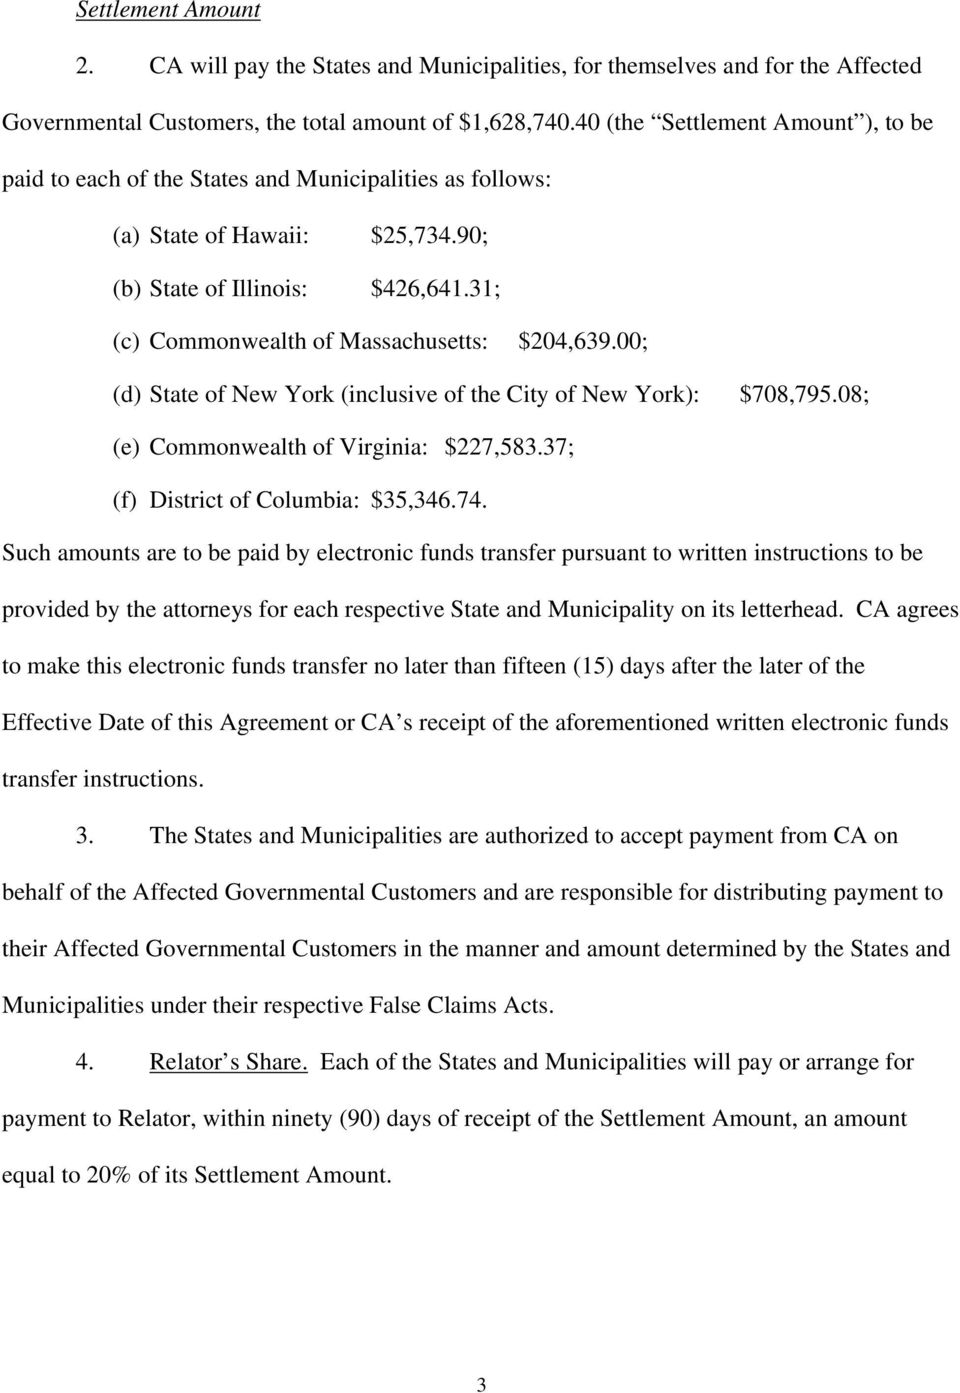 31; (c) Commonwealth of Massachusetts: $204,639.00; (d) State of New York (inclusive of the City of New York): $708,795.08; (e) Commonwealth of Virginia: $227,583.